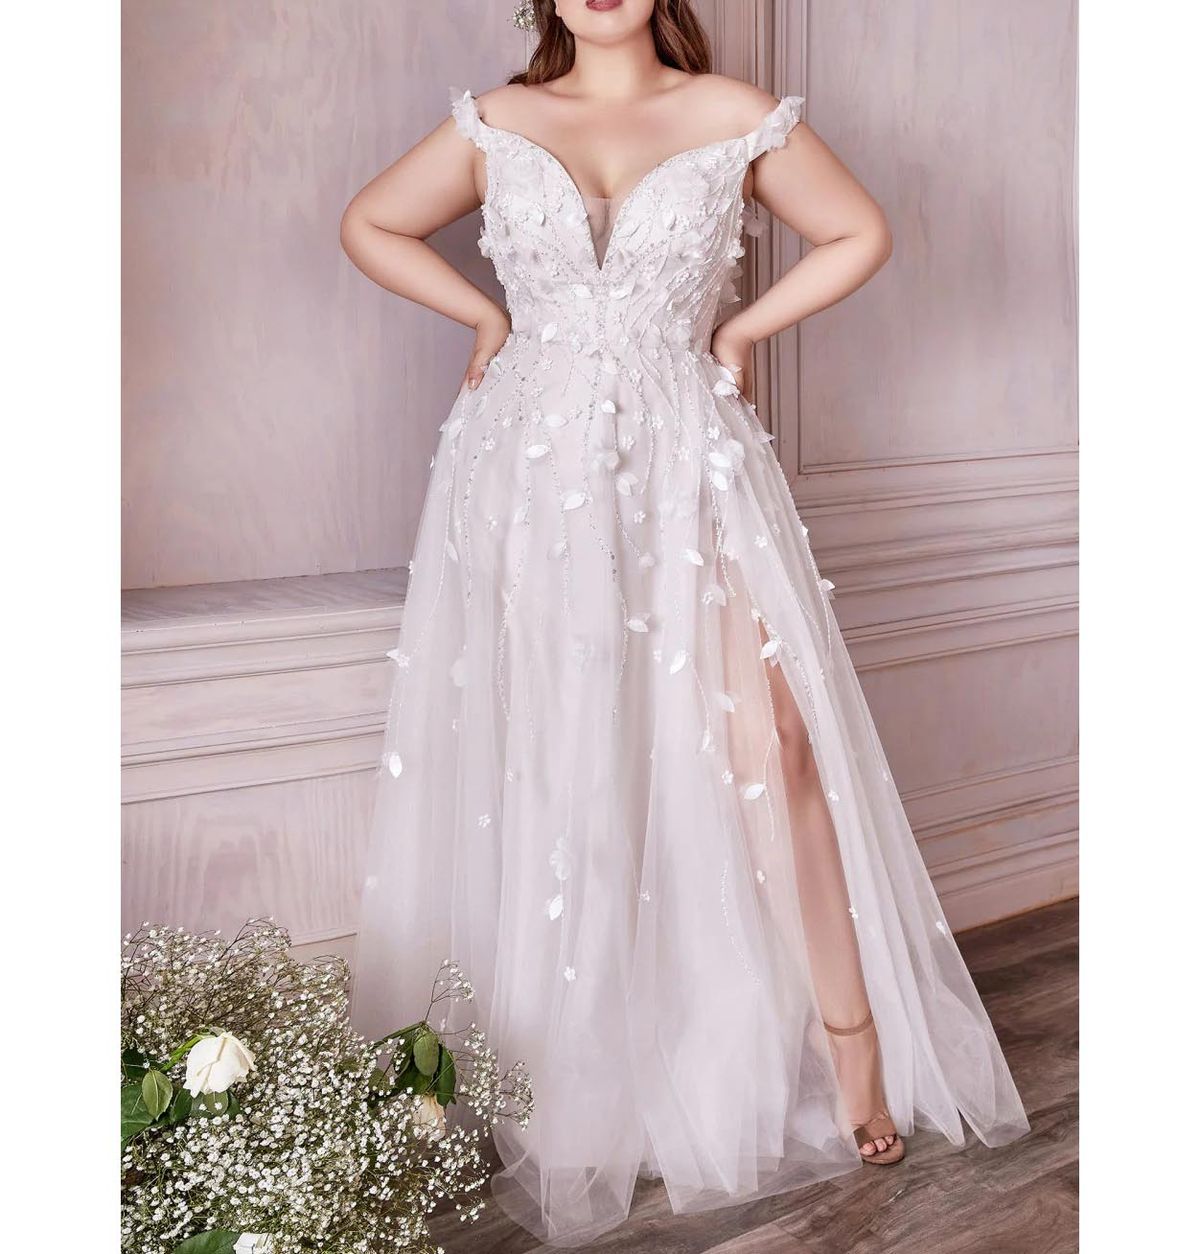 Luxury White Off Shoulder Wedding Dresses Chic Lace Appliqued Sweetheart  Gowns | eBay